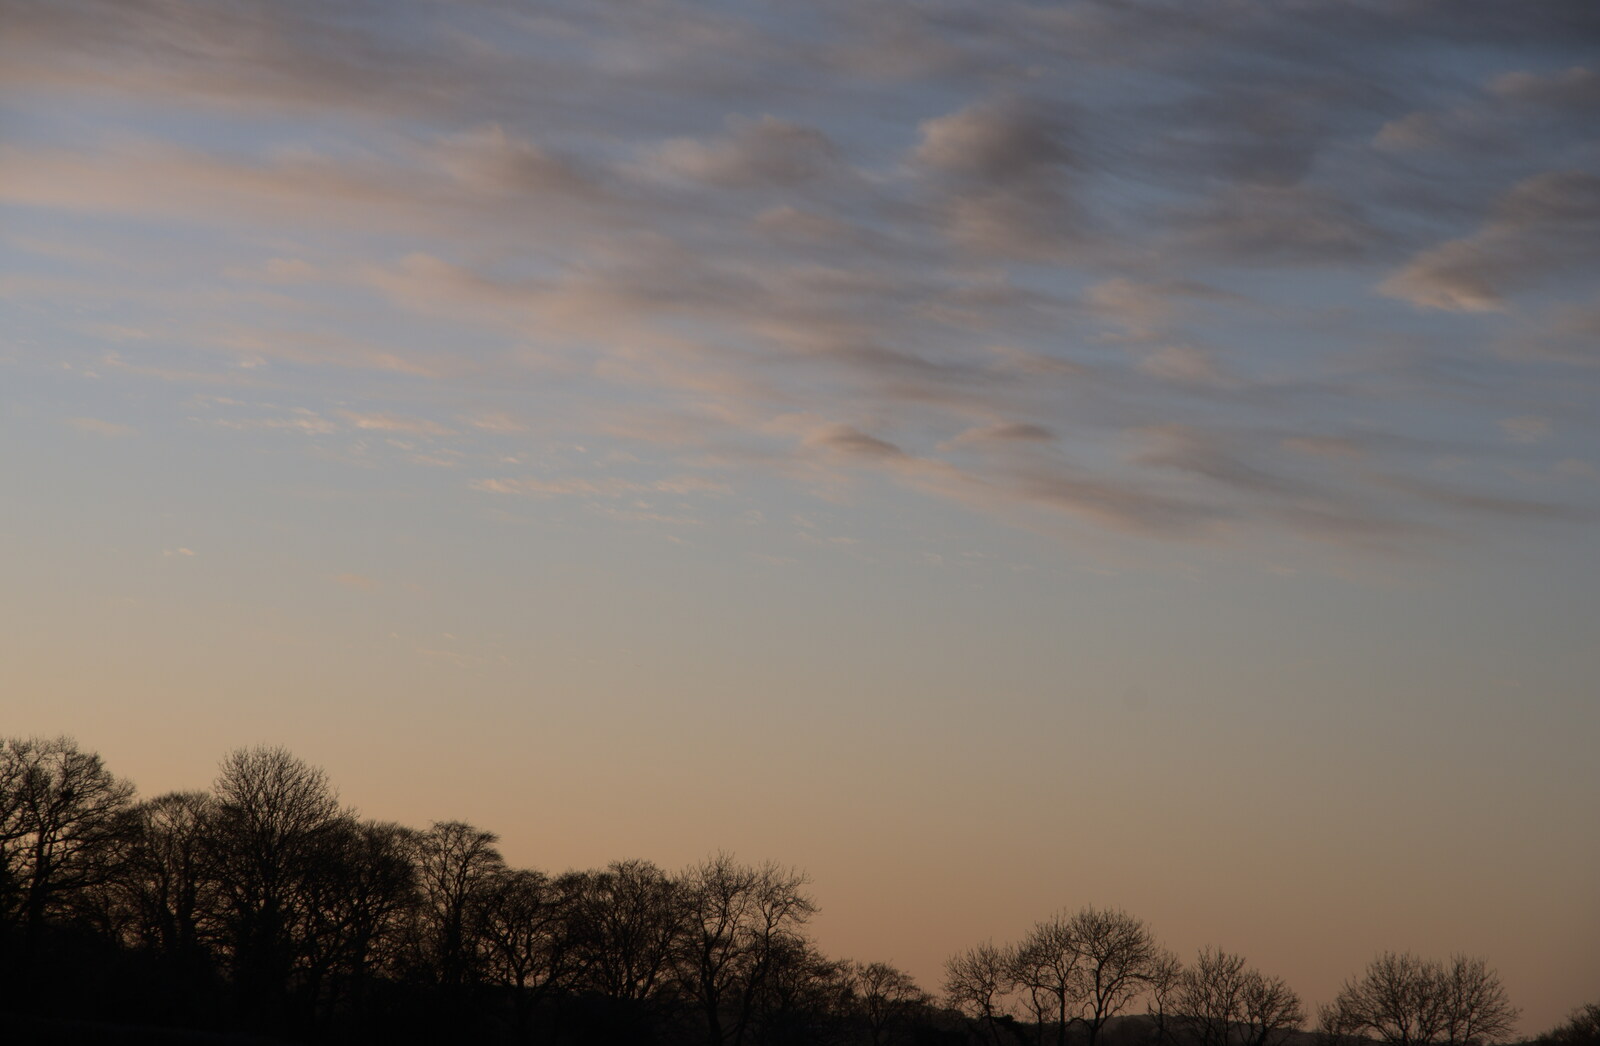 Wispy clouds in the dusk from A Short Trip to Spreyton, Devon - 18th January 2020